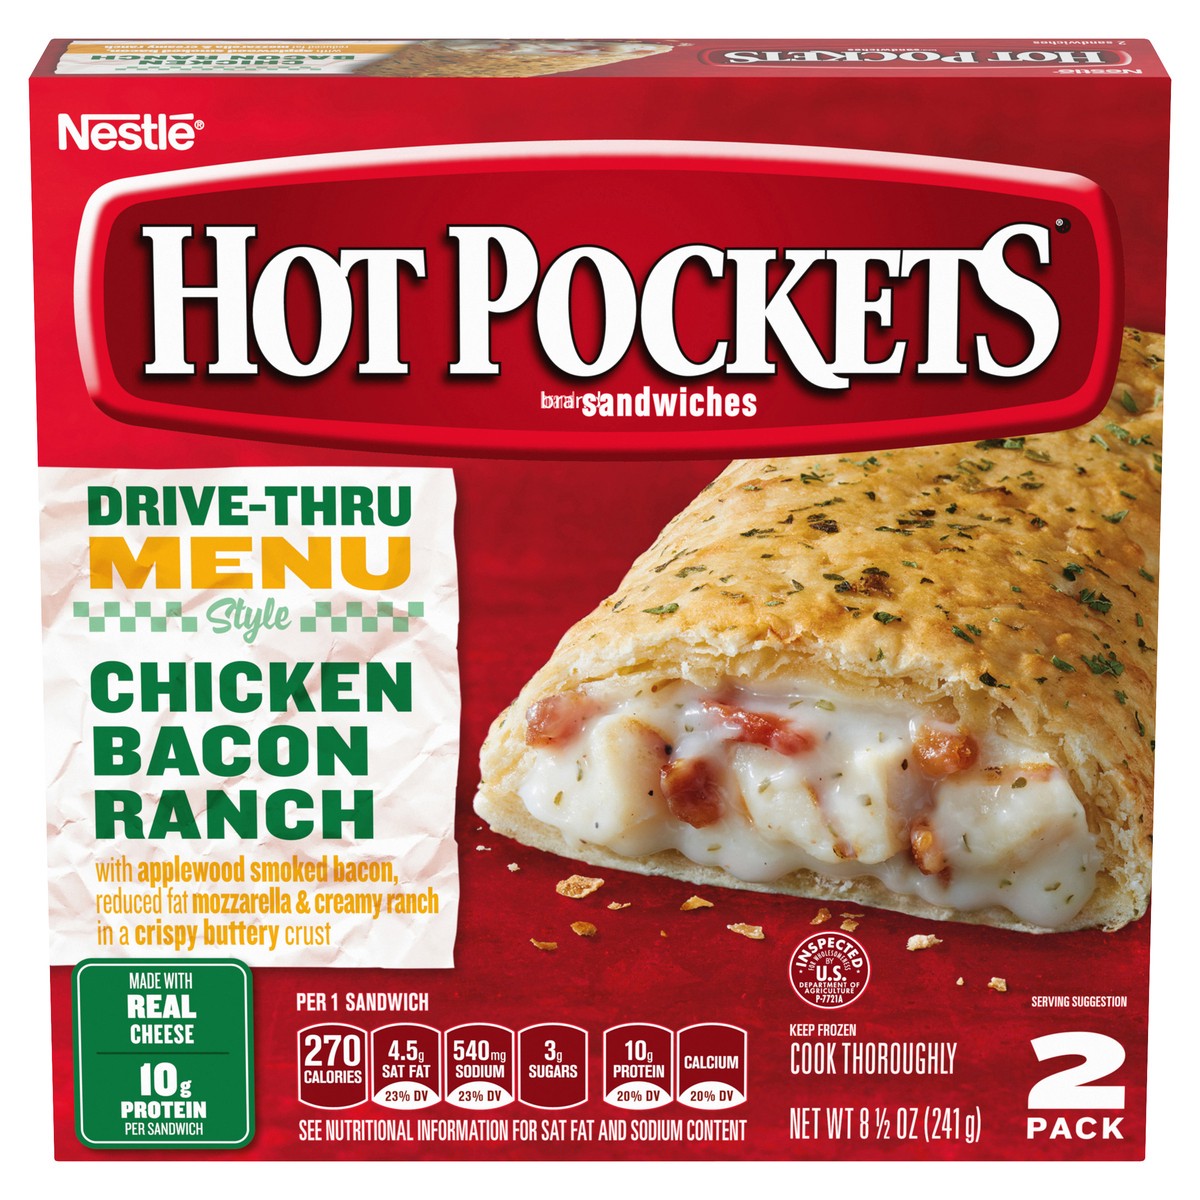 slide 1 of 8, Hot Pockets Hot Ones Spicy Garlic Chicken & Bacon Frozen Snacks in a Crispy Buttery Crust, Sandwich Snacks Made with Bacon, 2 Count Frozen Sandwiches, 8.5 oz